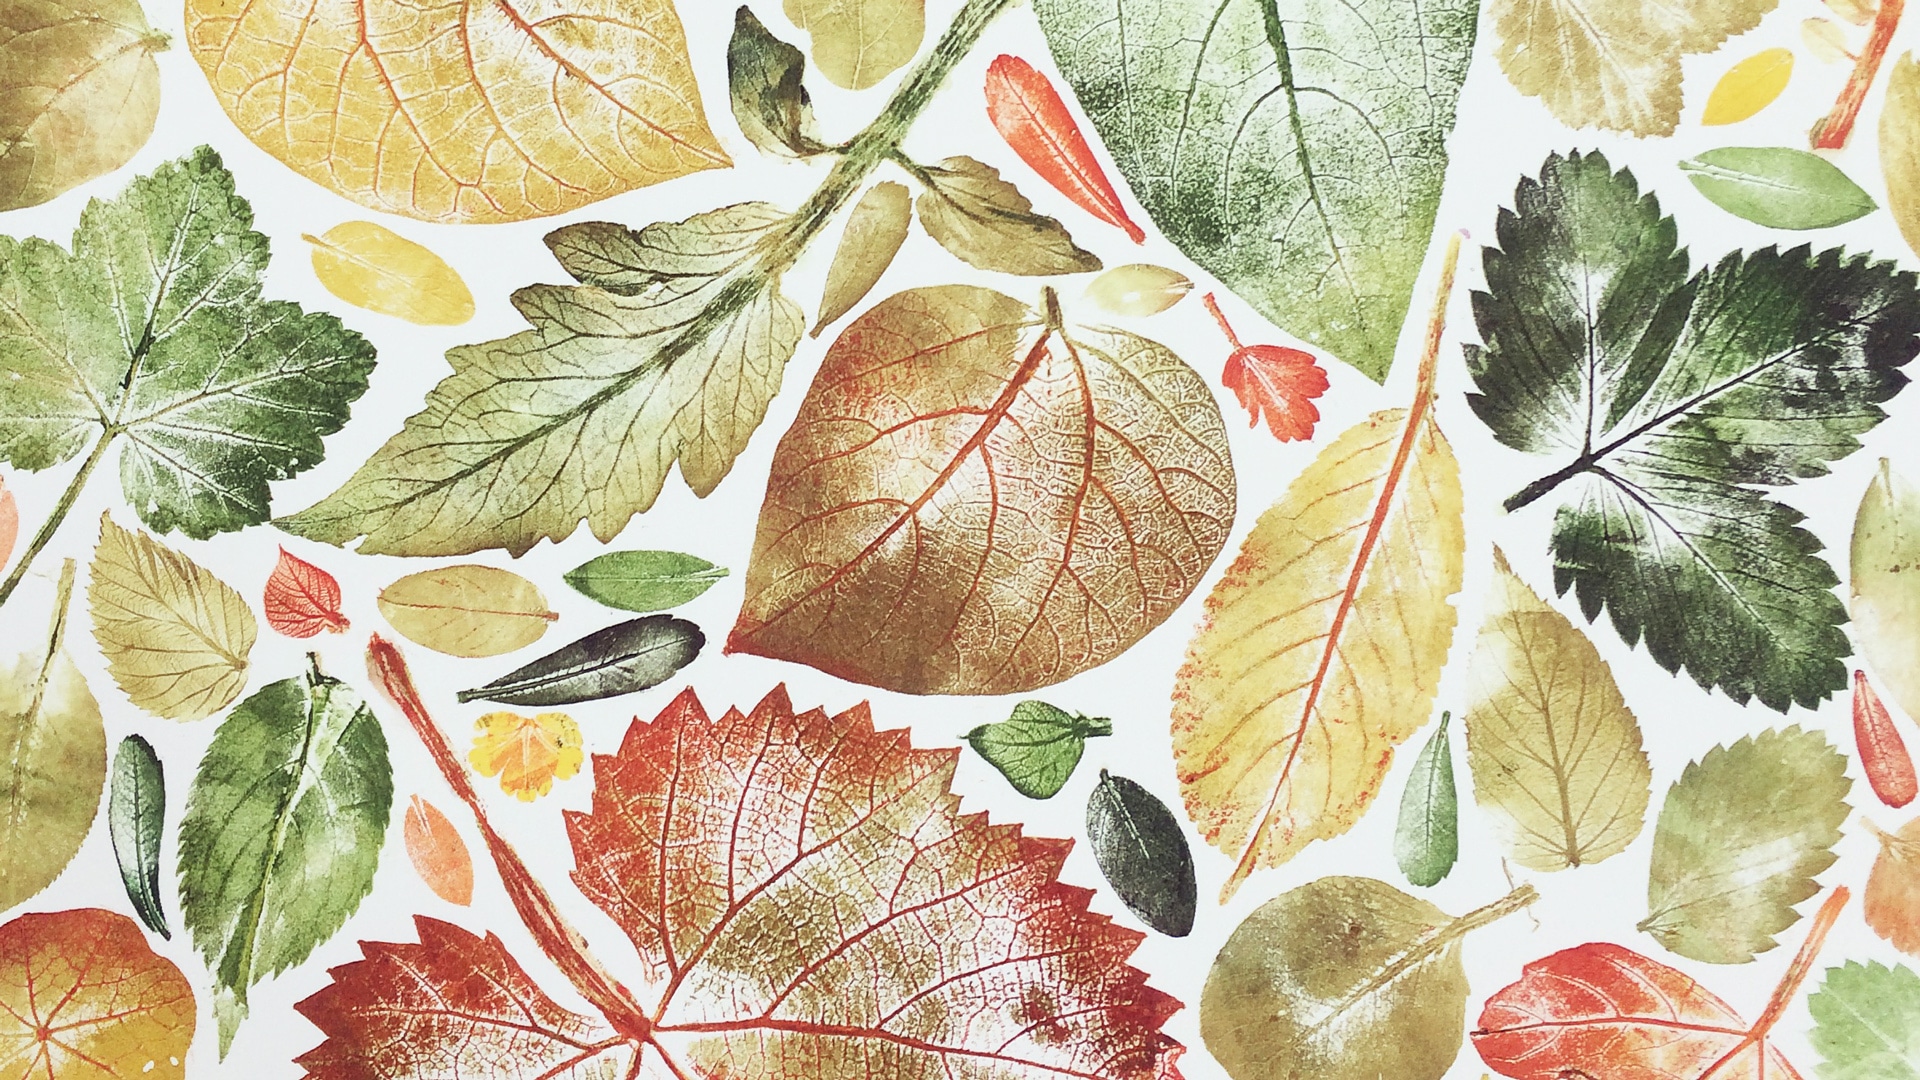 A Printwork of leaves showing what can be produced during the workshop